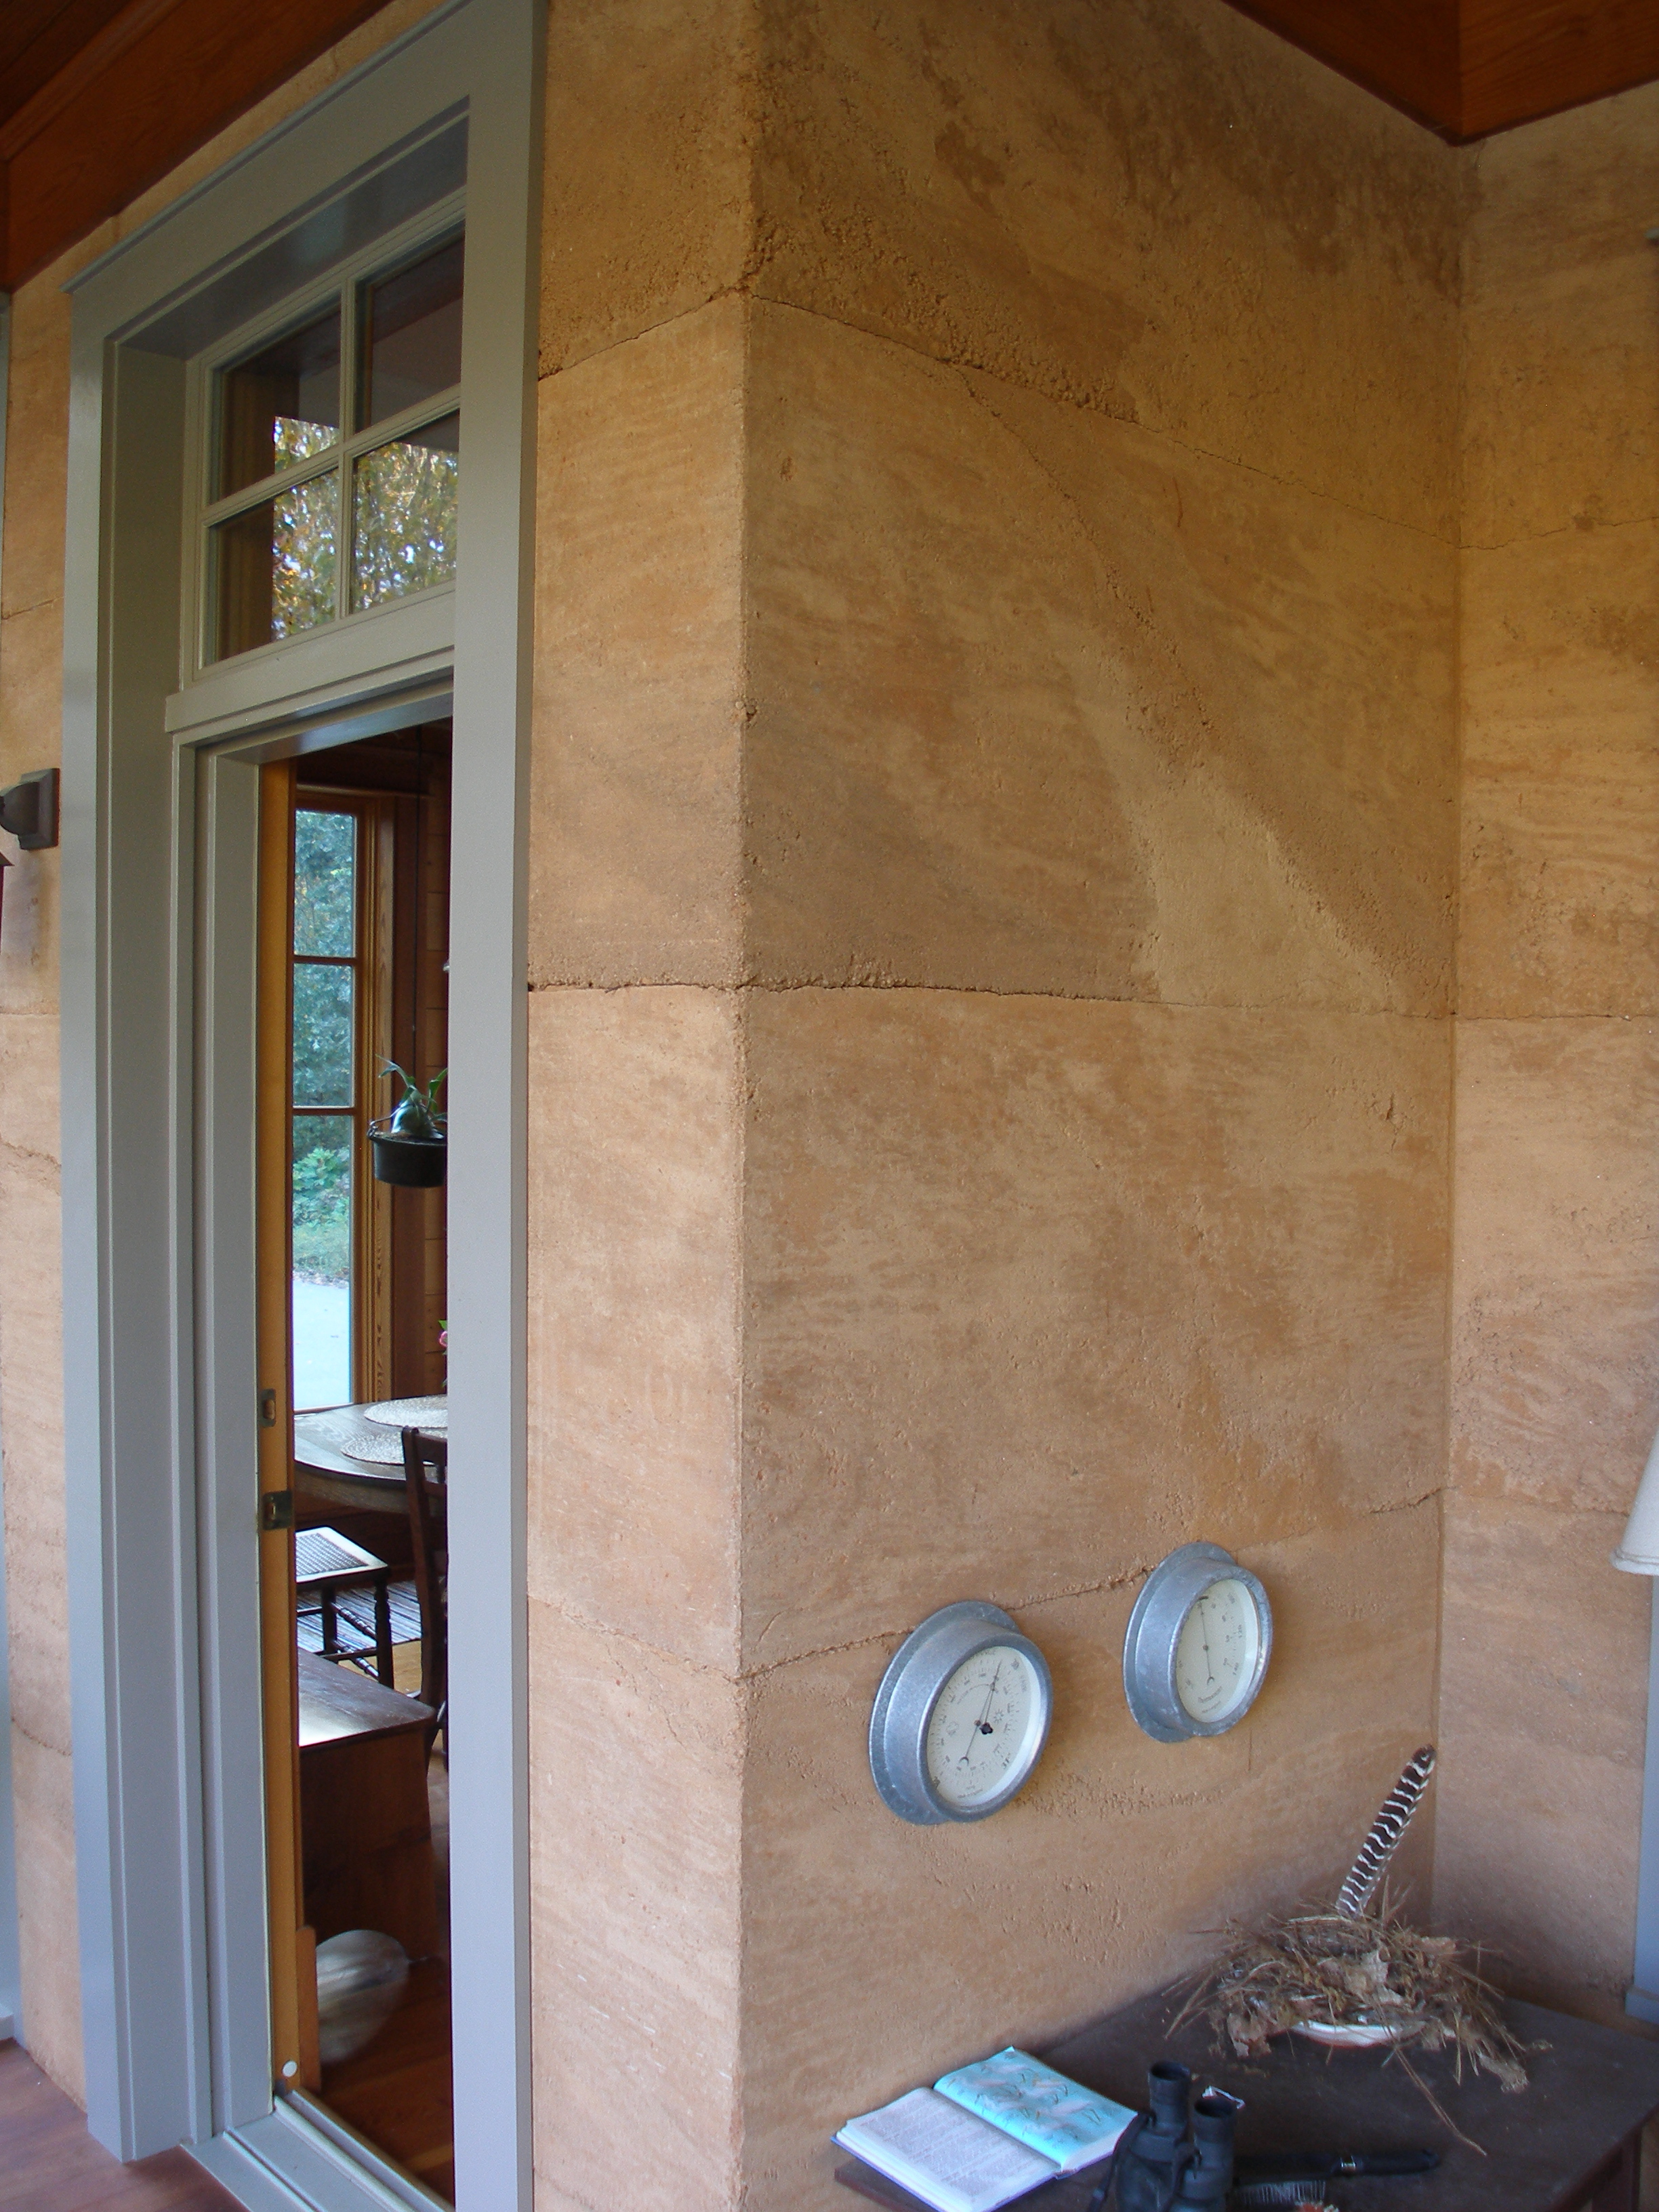 Detail of rammed earth walls.